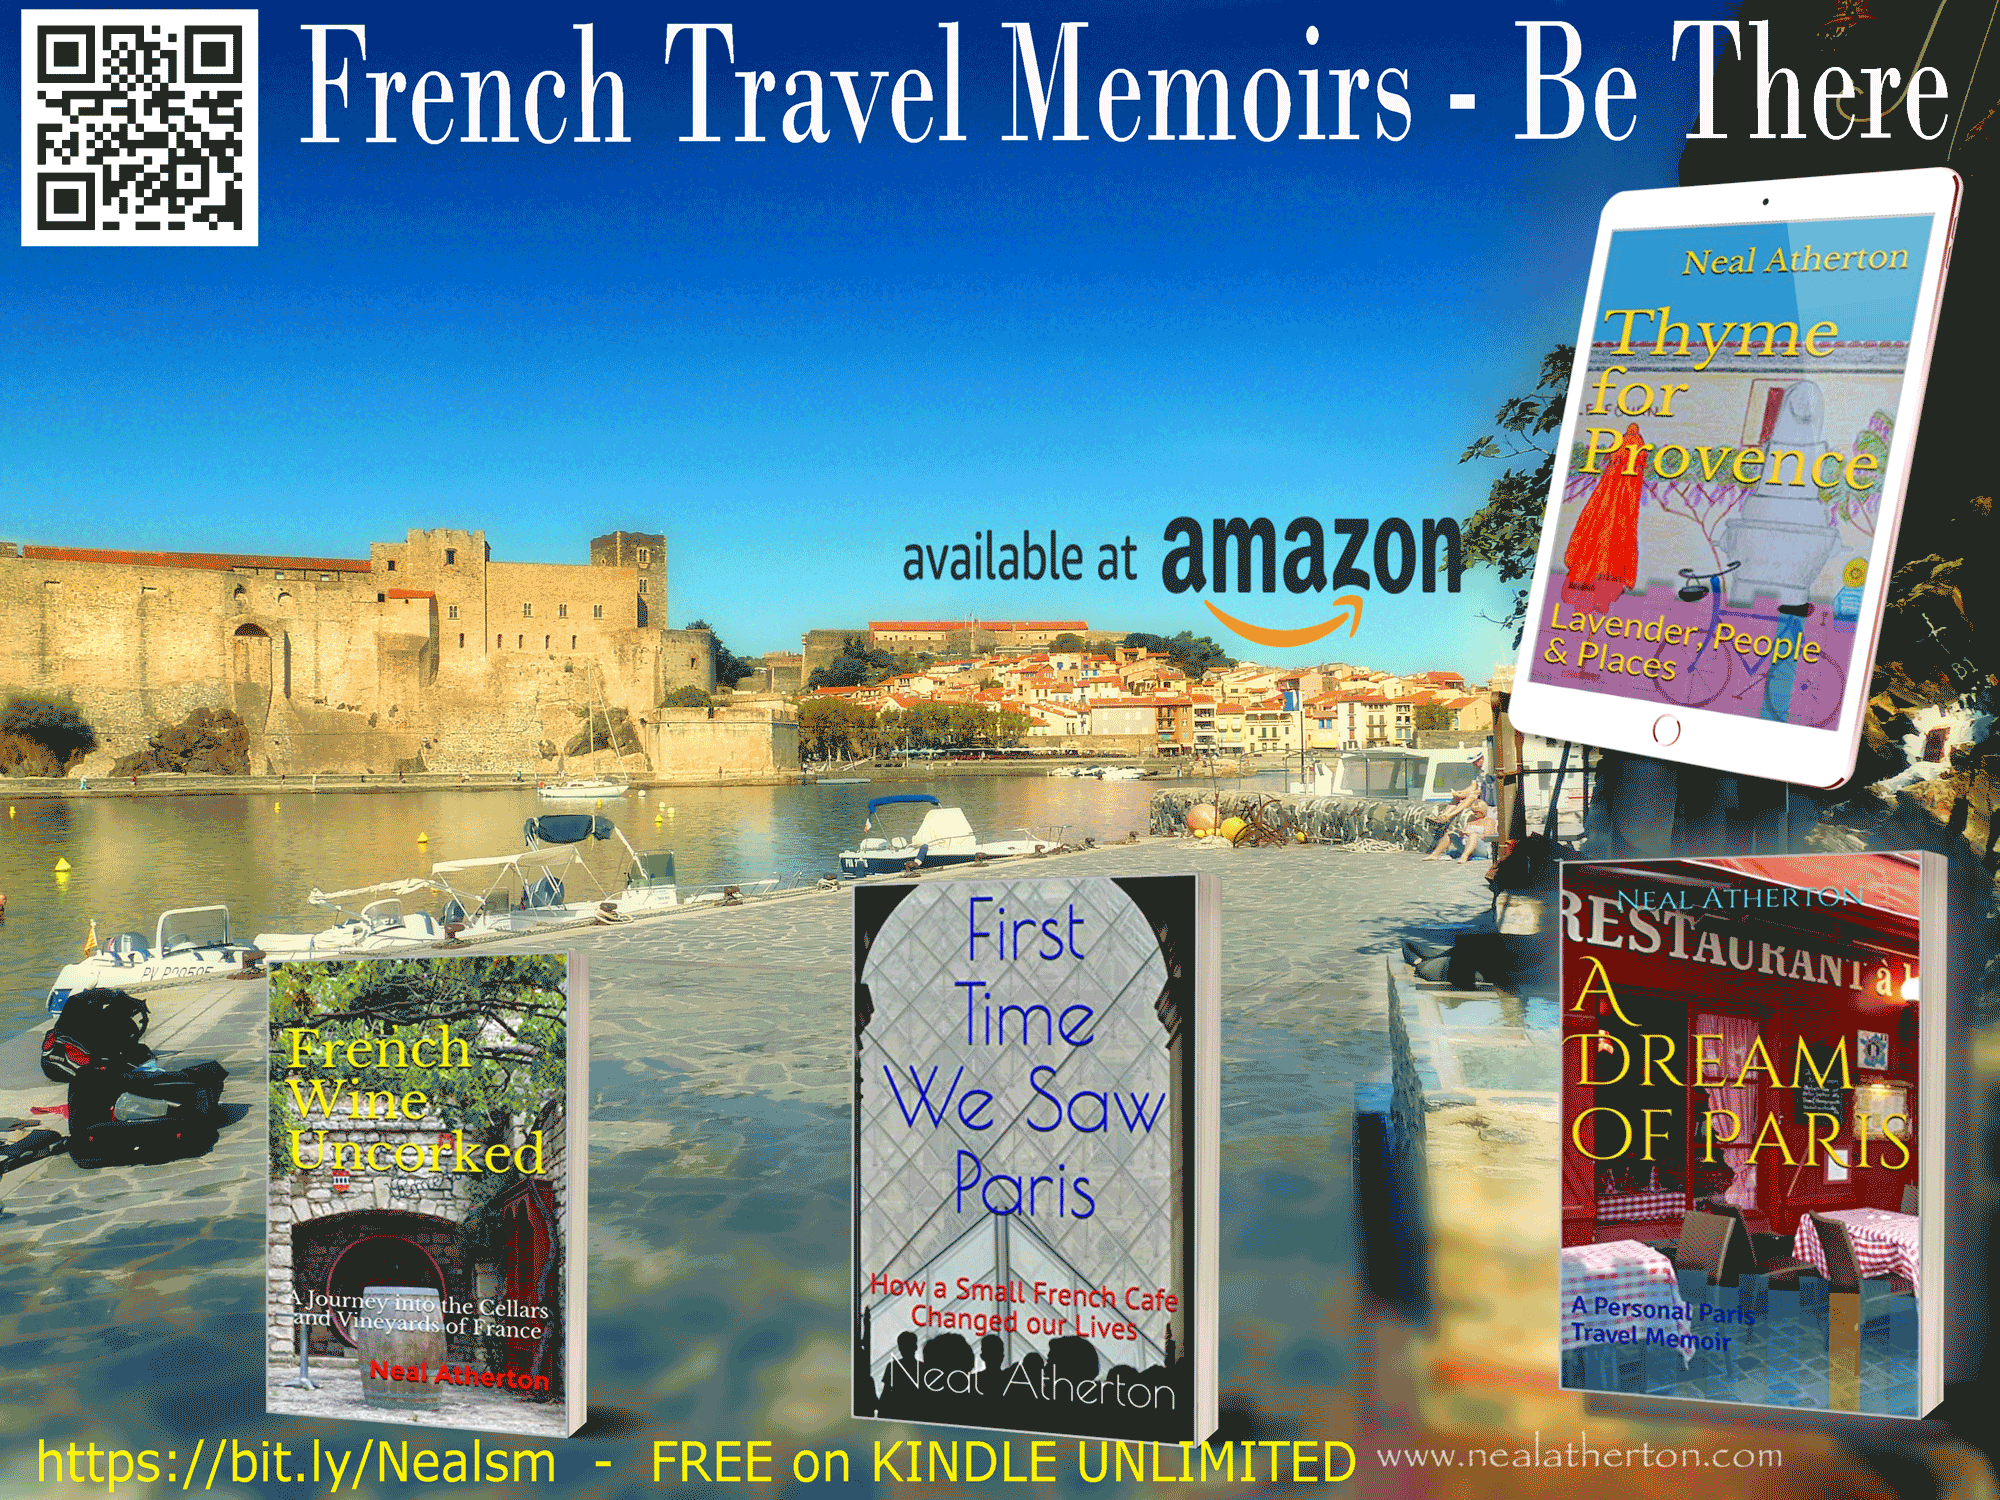 Alt="Photo of Collioure for French Travel Guide Memoir on Kindle Unlimited"